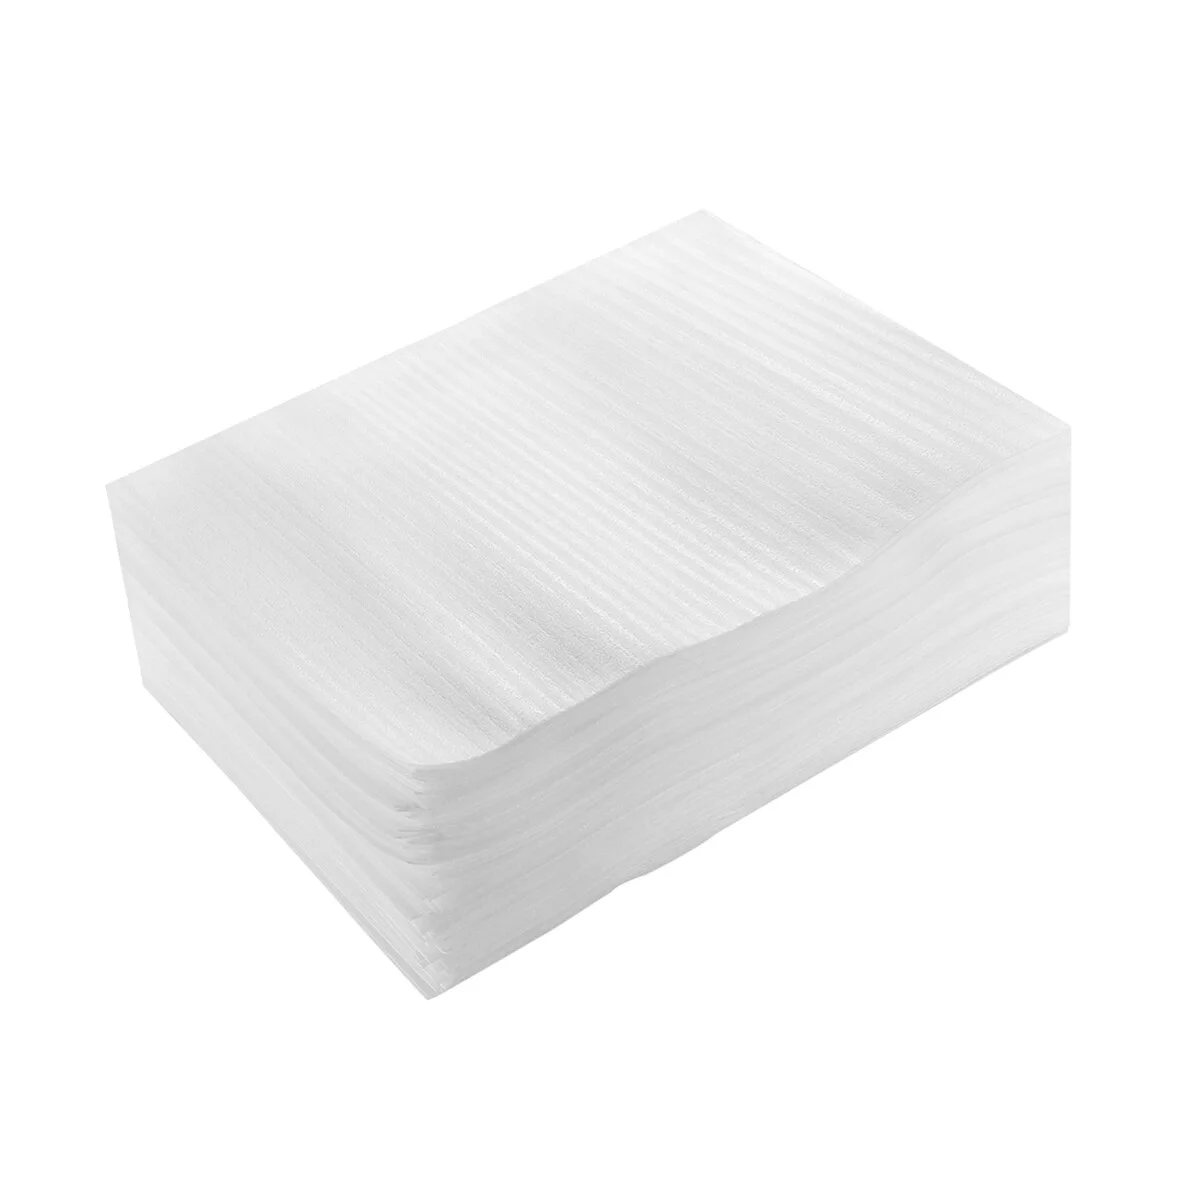 

100PCS Cushion Sheets Moving Wrap Pouches White Bags Moving Supplies for Packing Packing Storing ( 25x20cm )